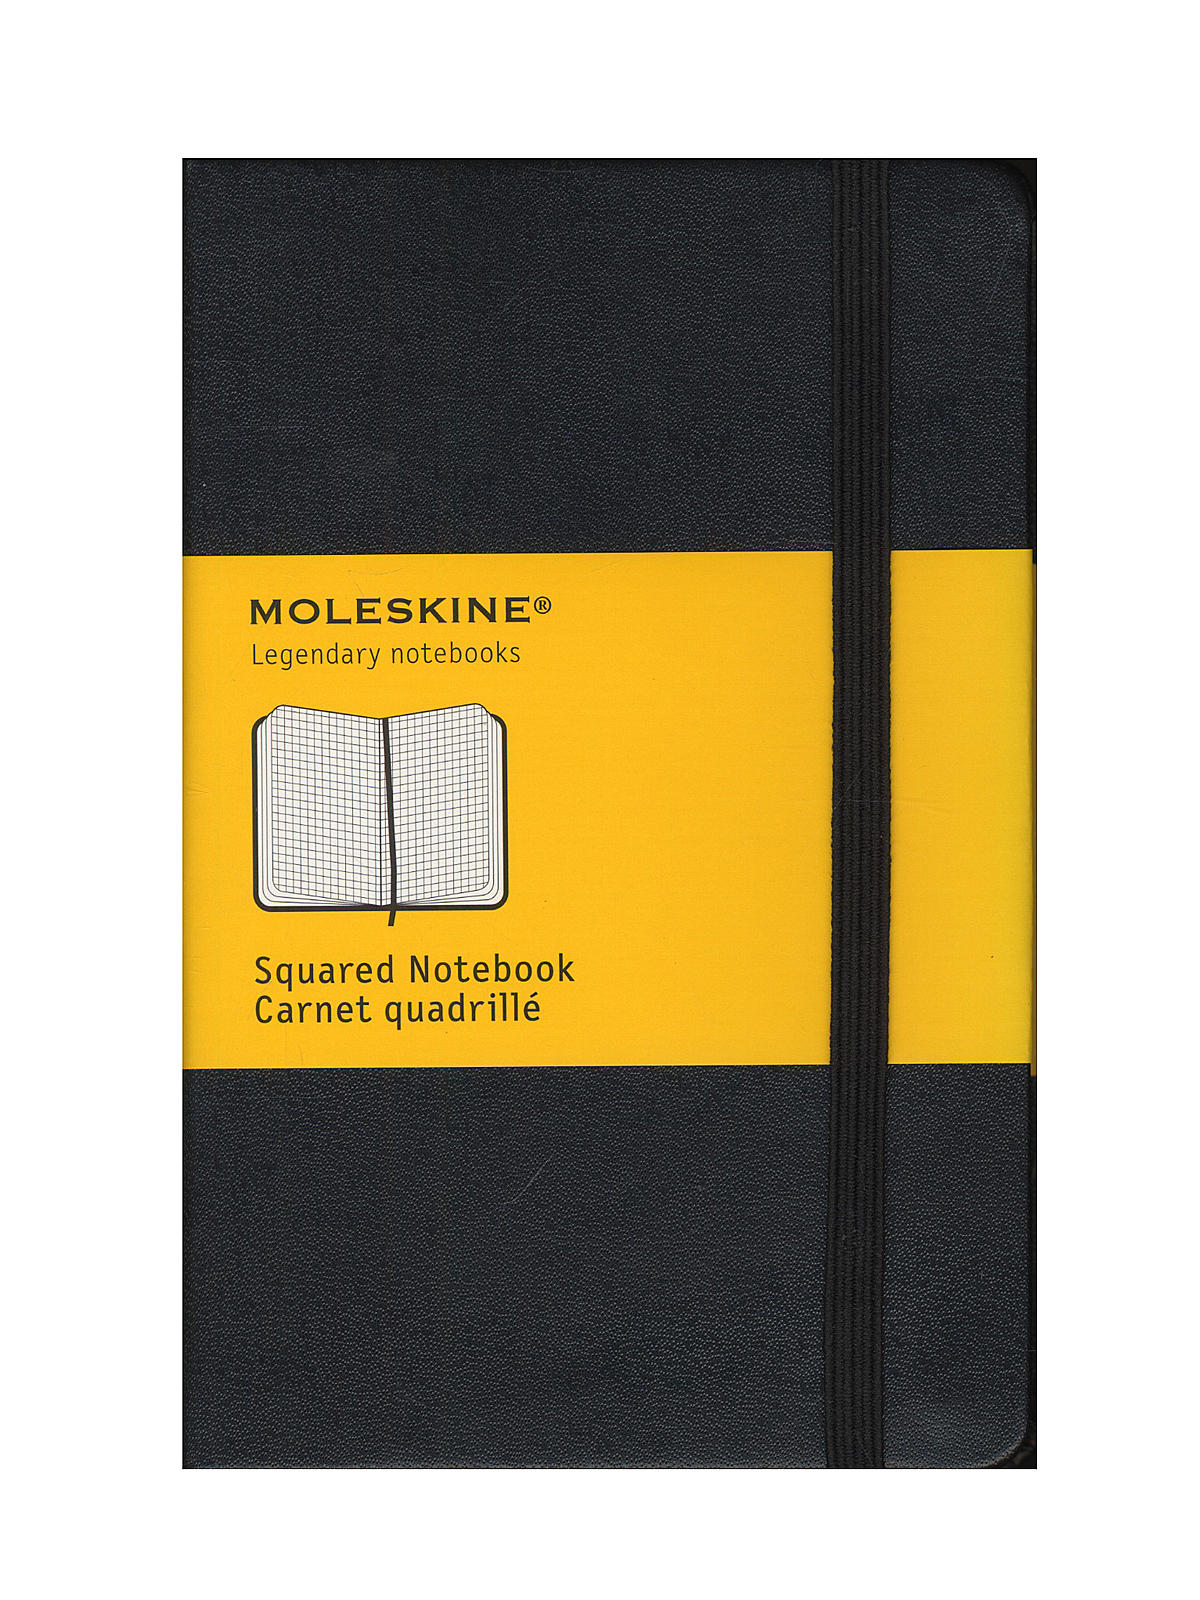 Classic Hard Cover Notebooks Black 3 1 2 In. X 5 1 2 In. 192 Pages, Squared